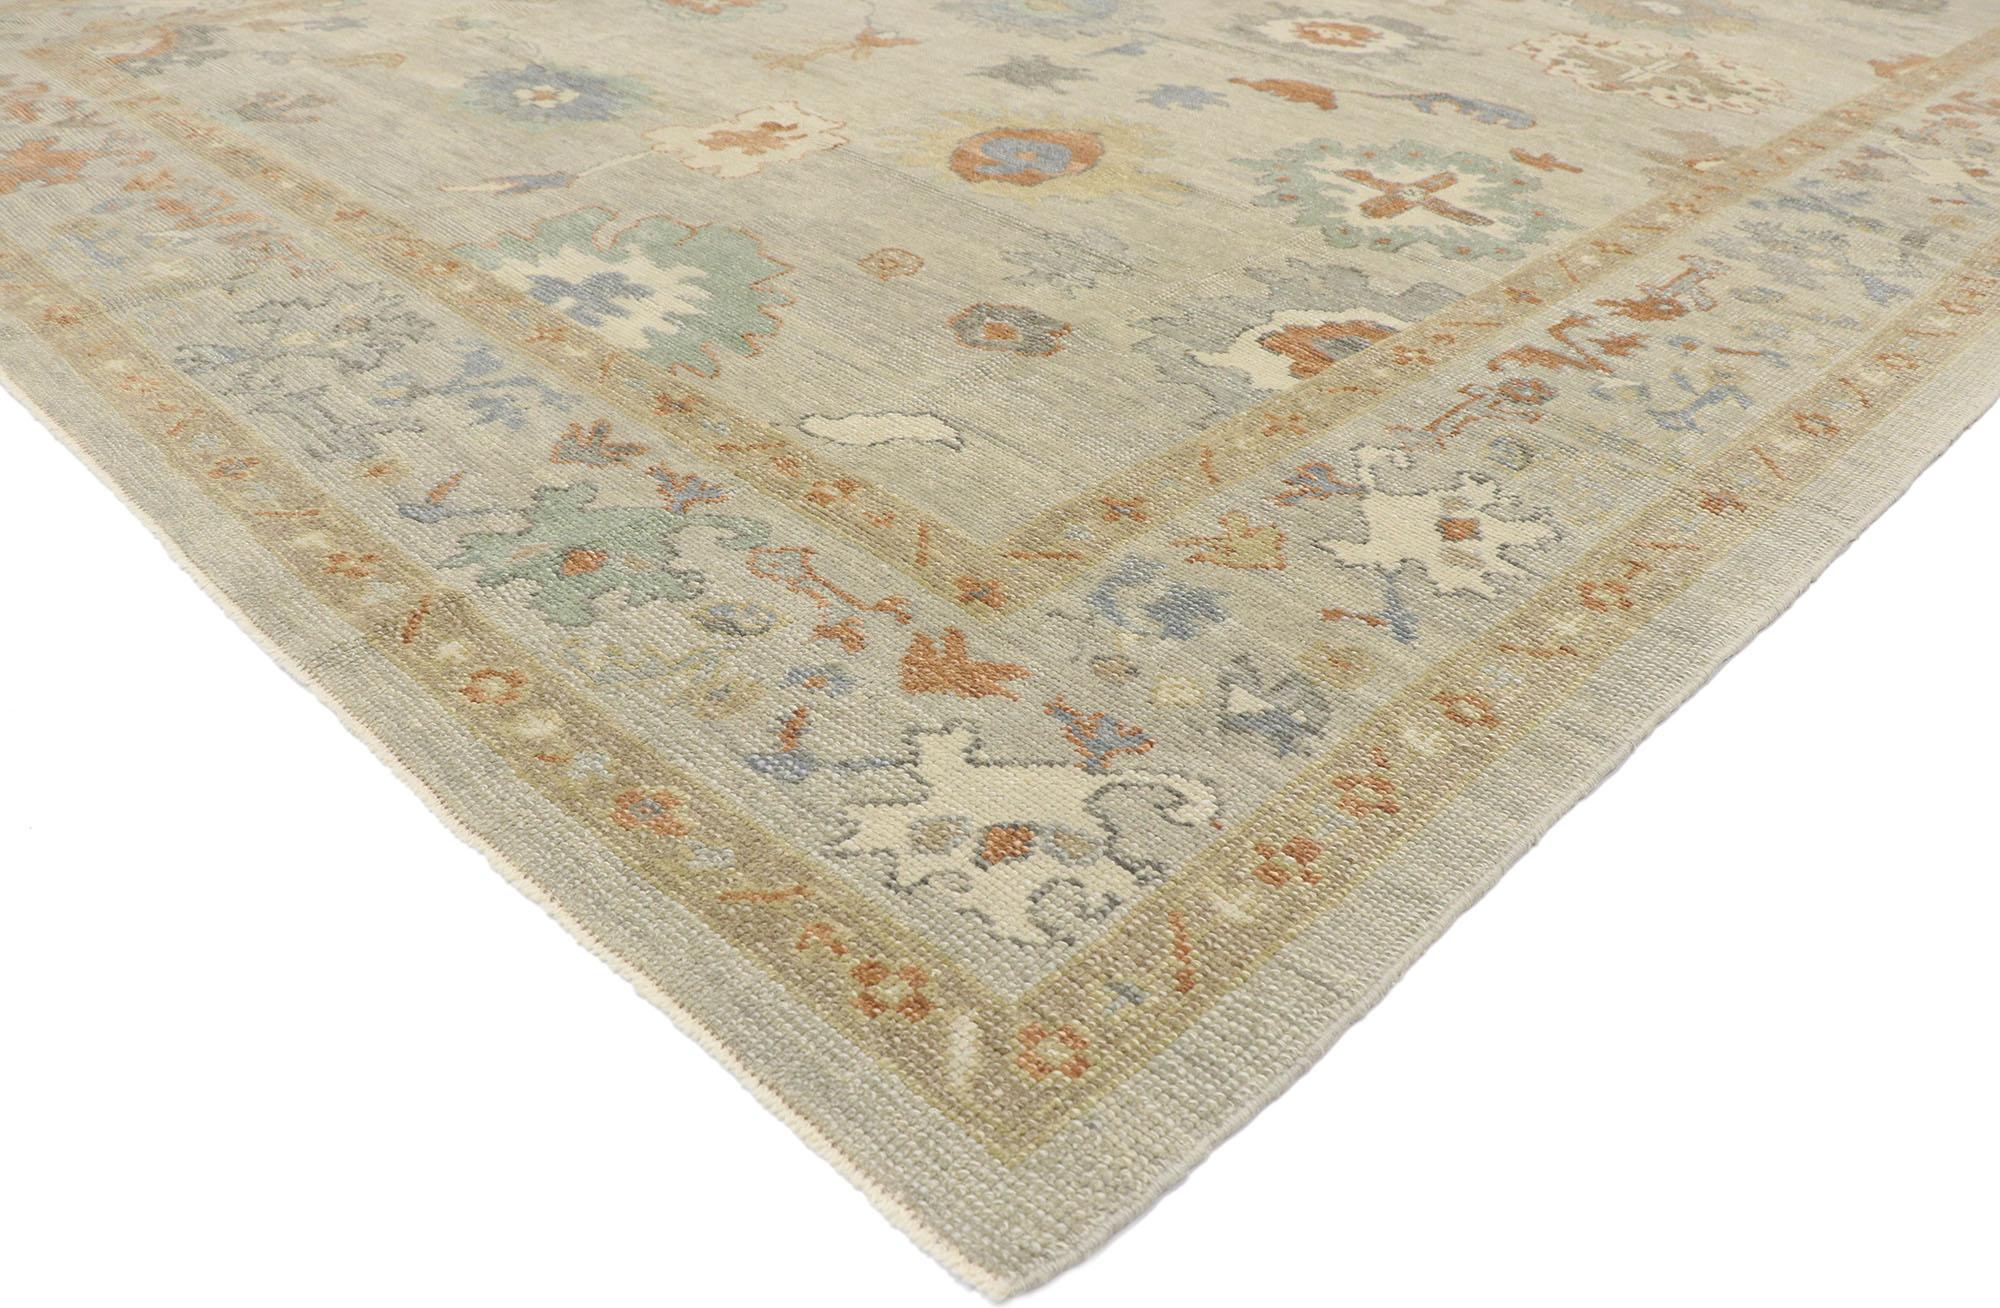 53514, new contemporary Turkish Oushak rug with transitional modern style 09'11 x 12'06. Playful and polished, this hand-knotted wool contemporary Turkish Oushak rug features an all-over botanical pattern spread across an abrashed light gray field.